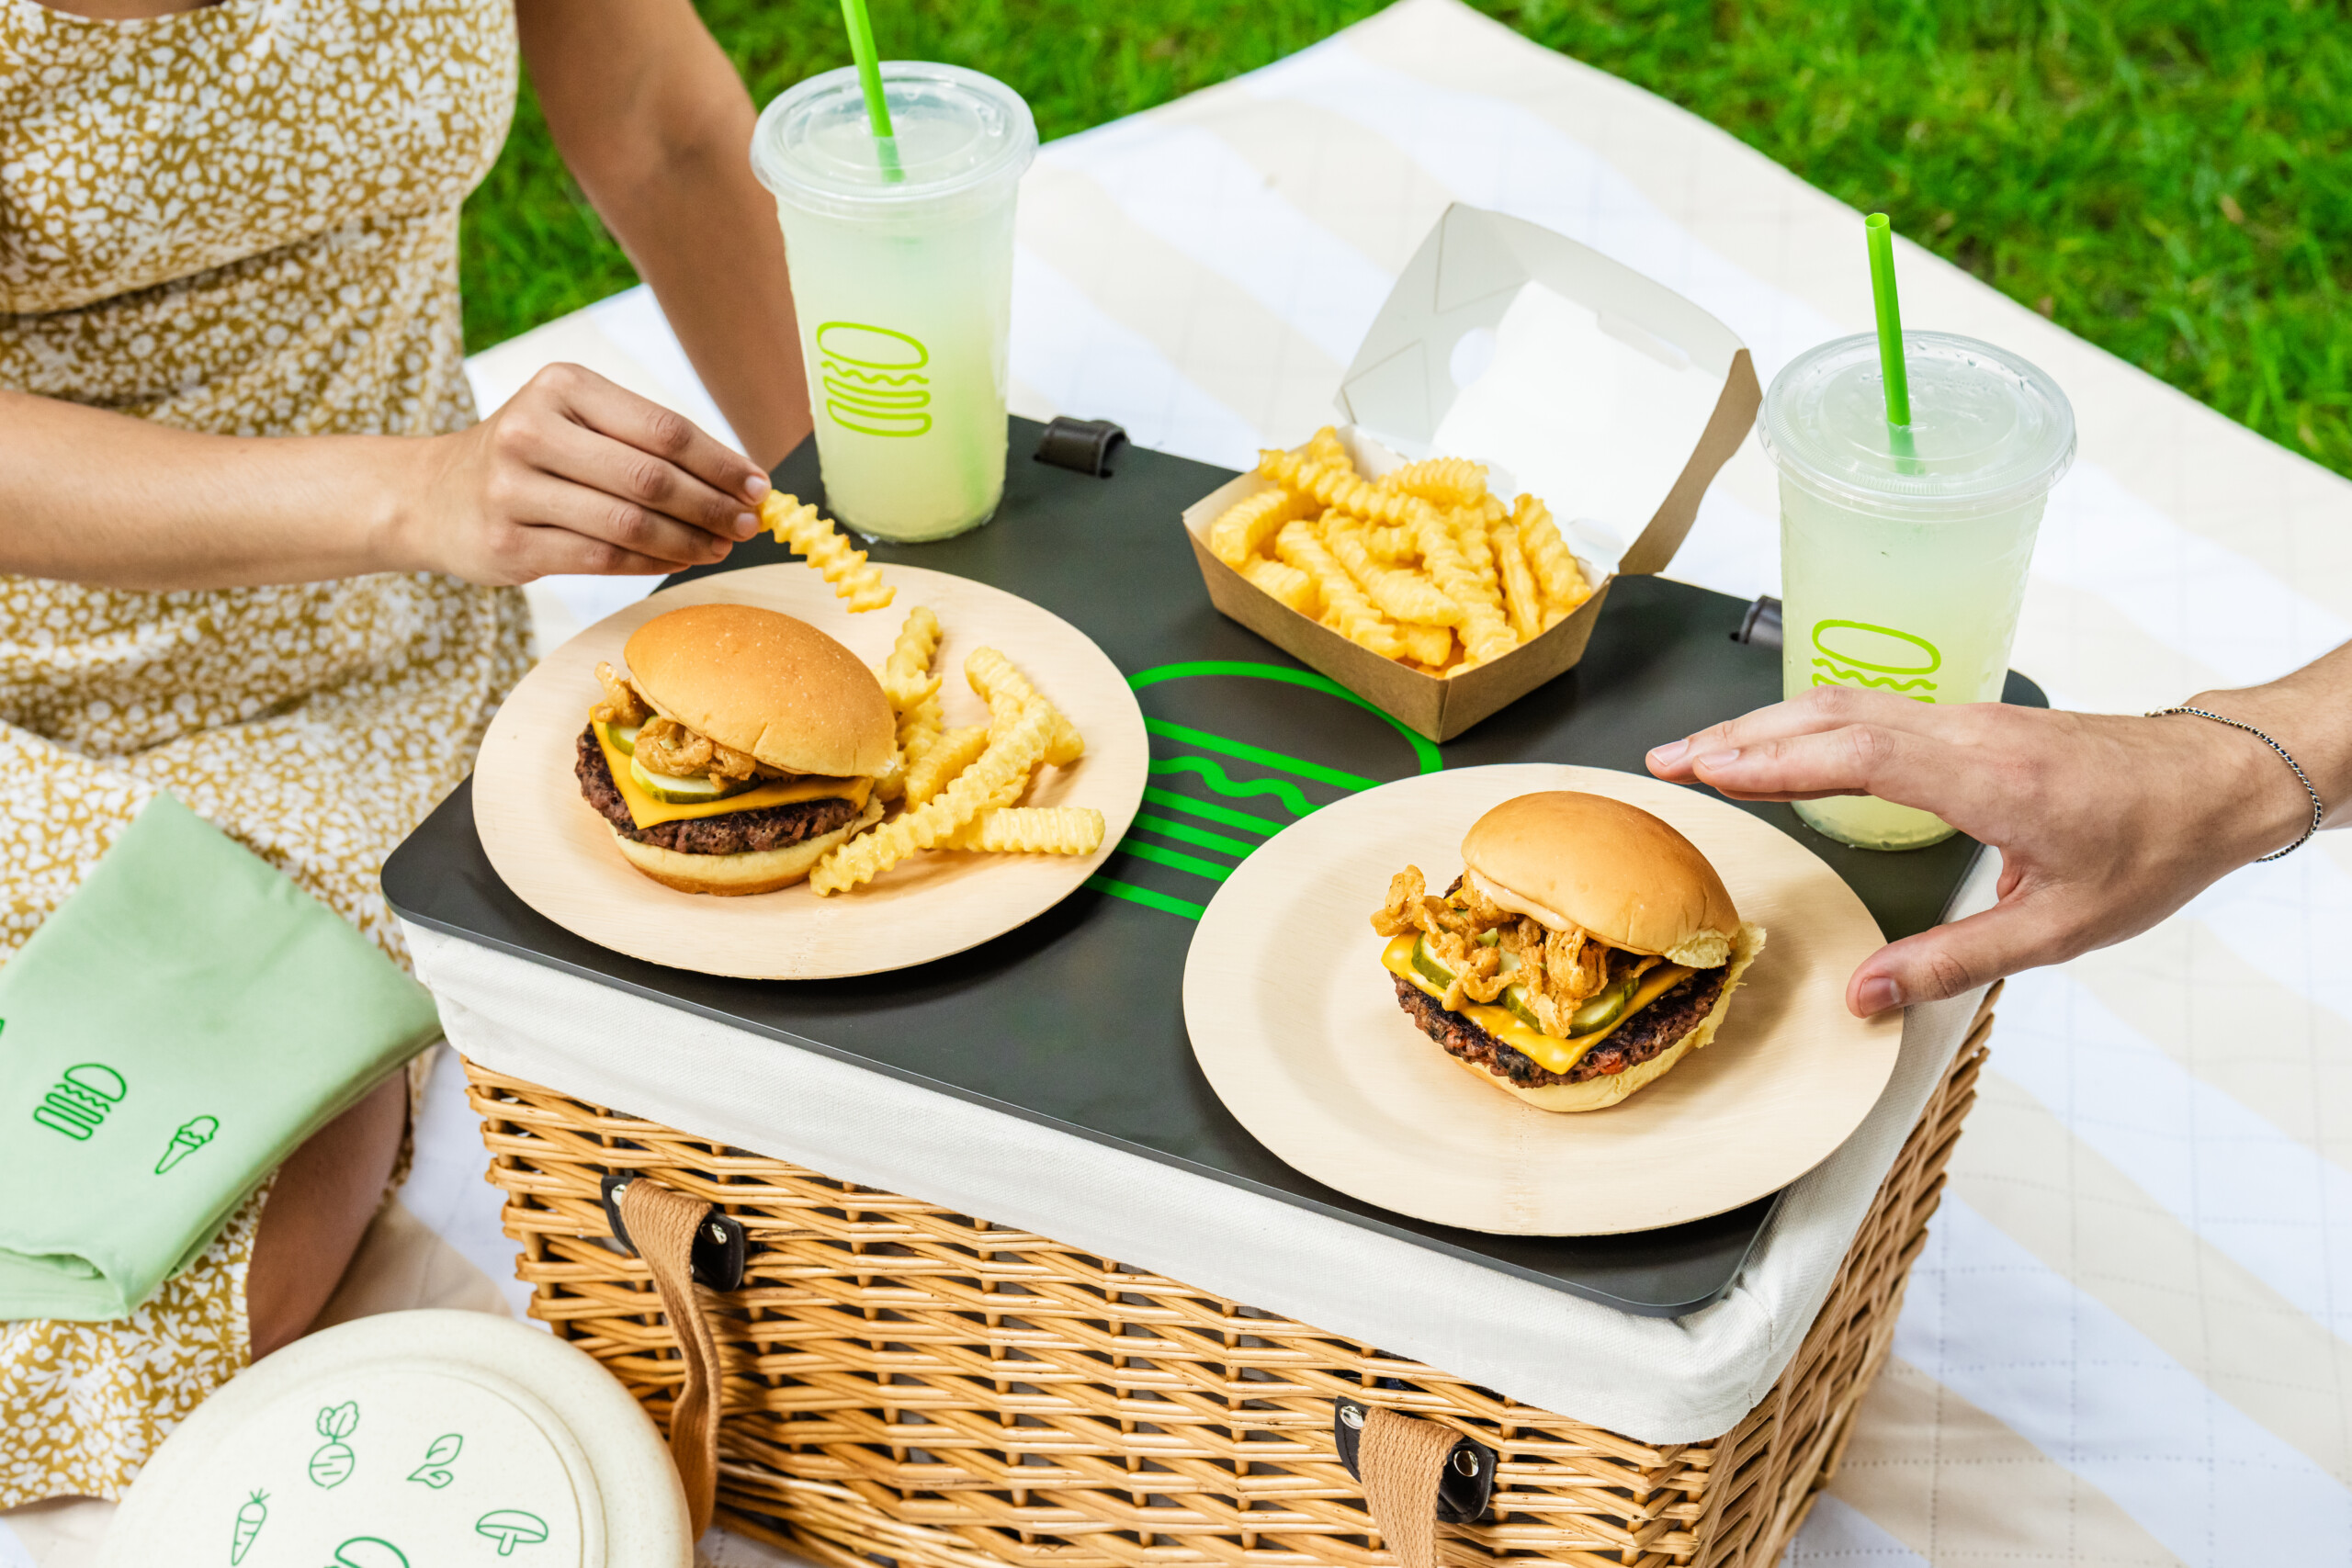 Shake Shack Celebrates National Picnic Month with New Plant-Based Menu and “Veg Out” Picnic Kits